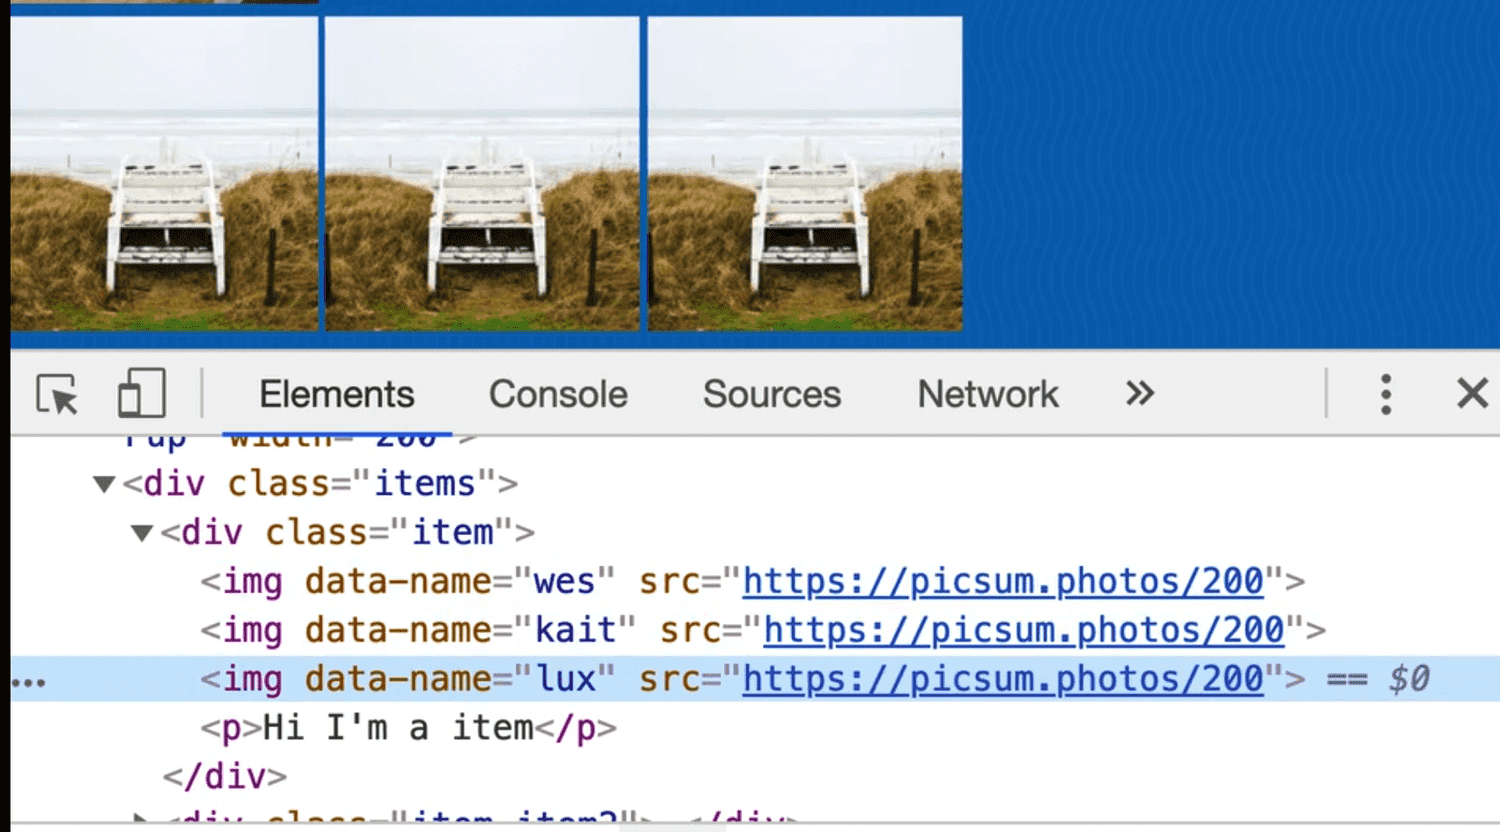 rendered html showing data-name attributes on img elements